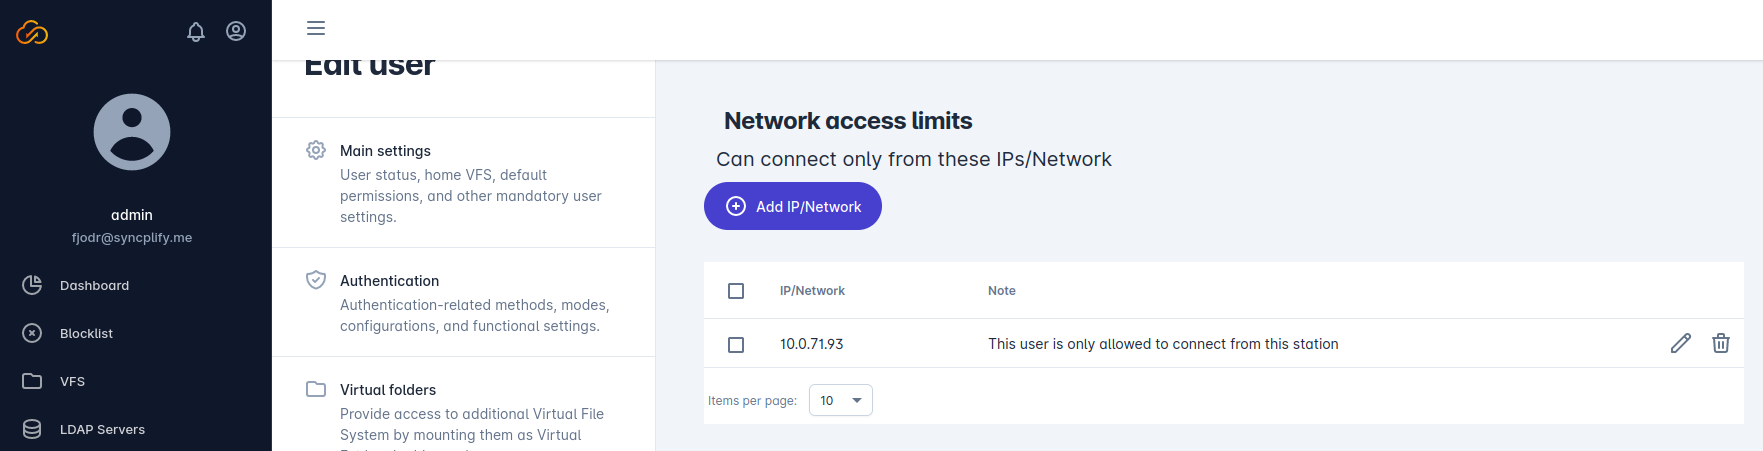 network_access_limits